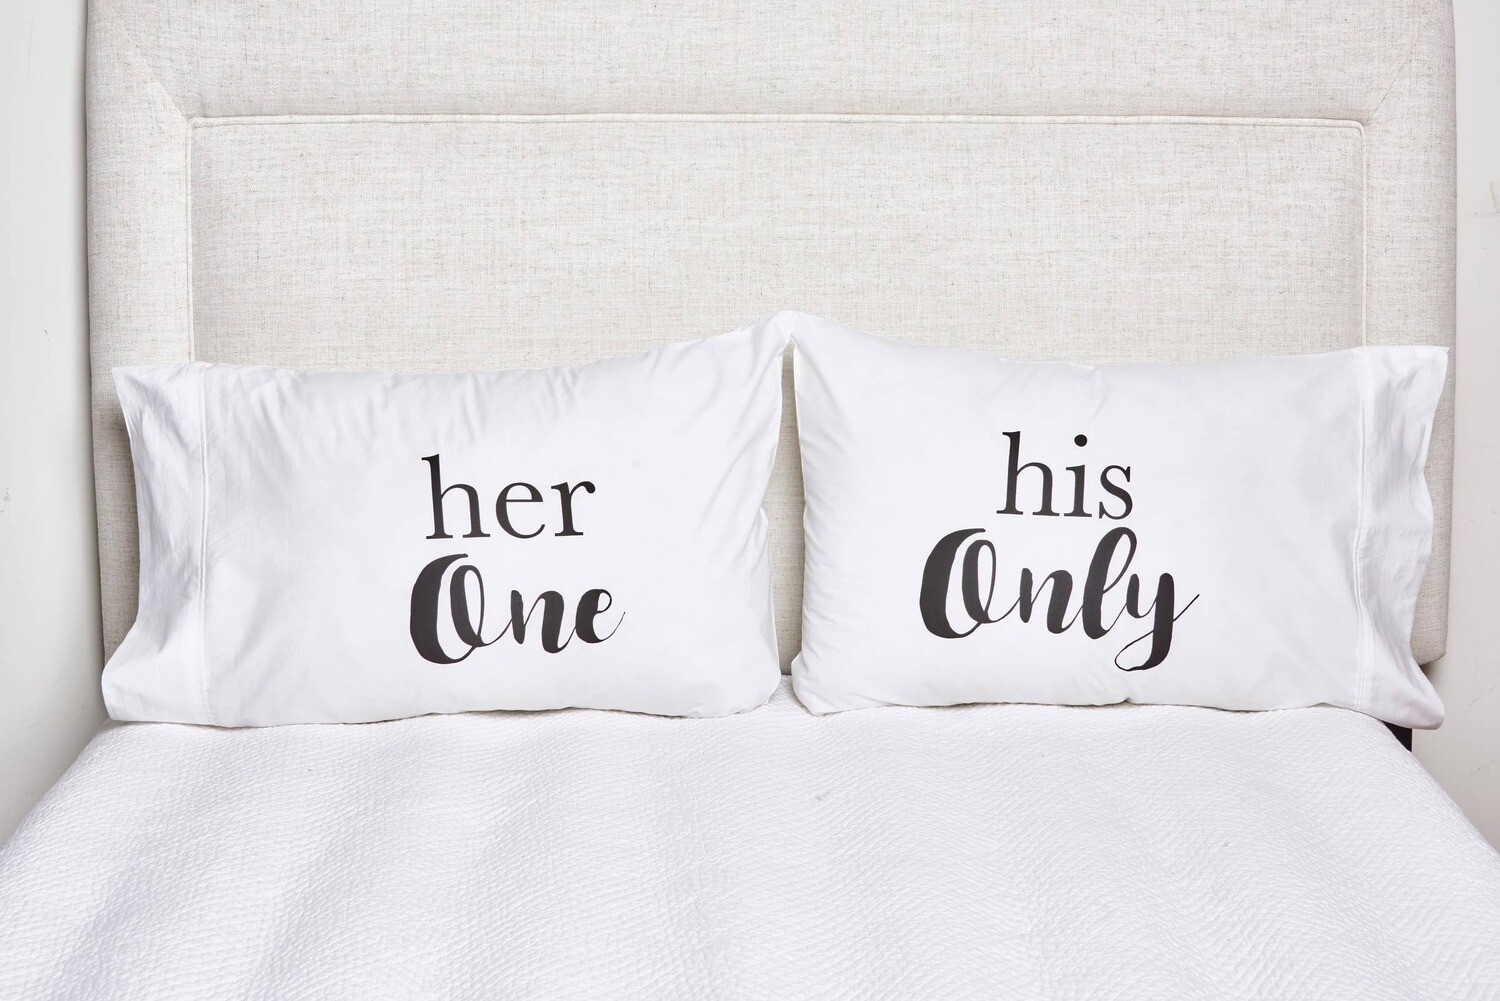 Her One His Only Pillowcase Set